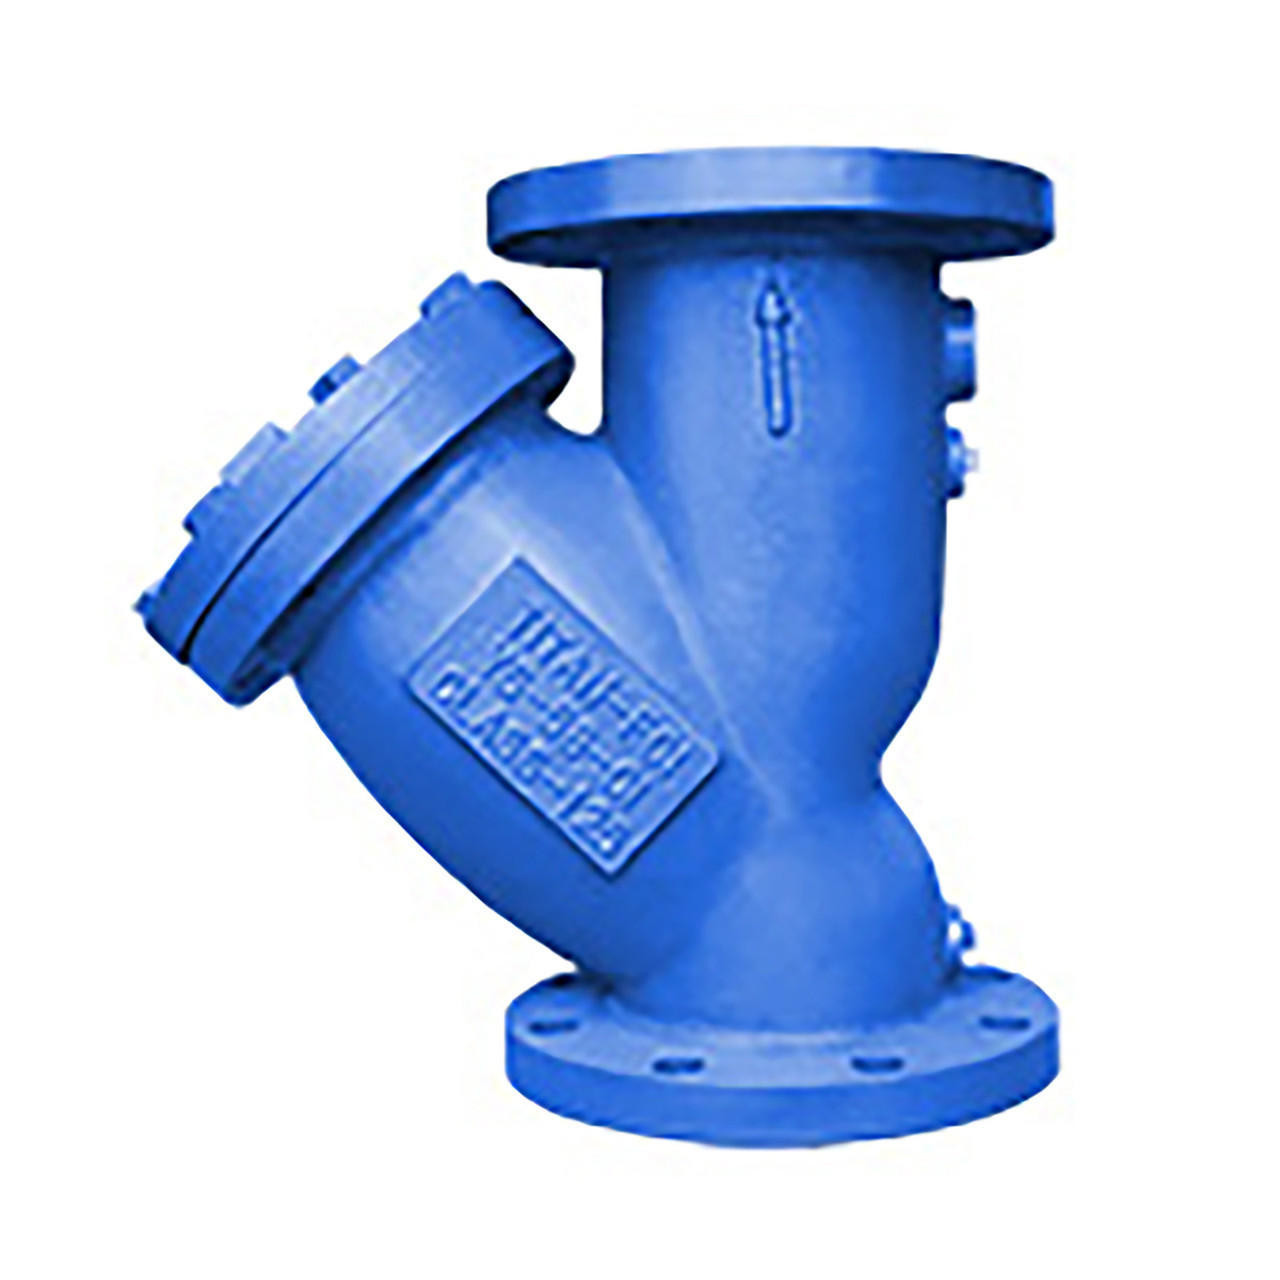 Titan Flow Control YS58I0400 4 Inch Y Strainer, Cast Iron, ANSI 125,  Flanged Ends, Bolted Cover, Epoxy Painted, Plugged Blow-Off